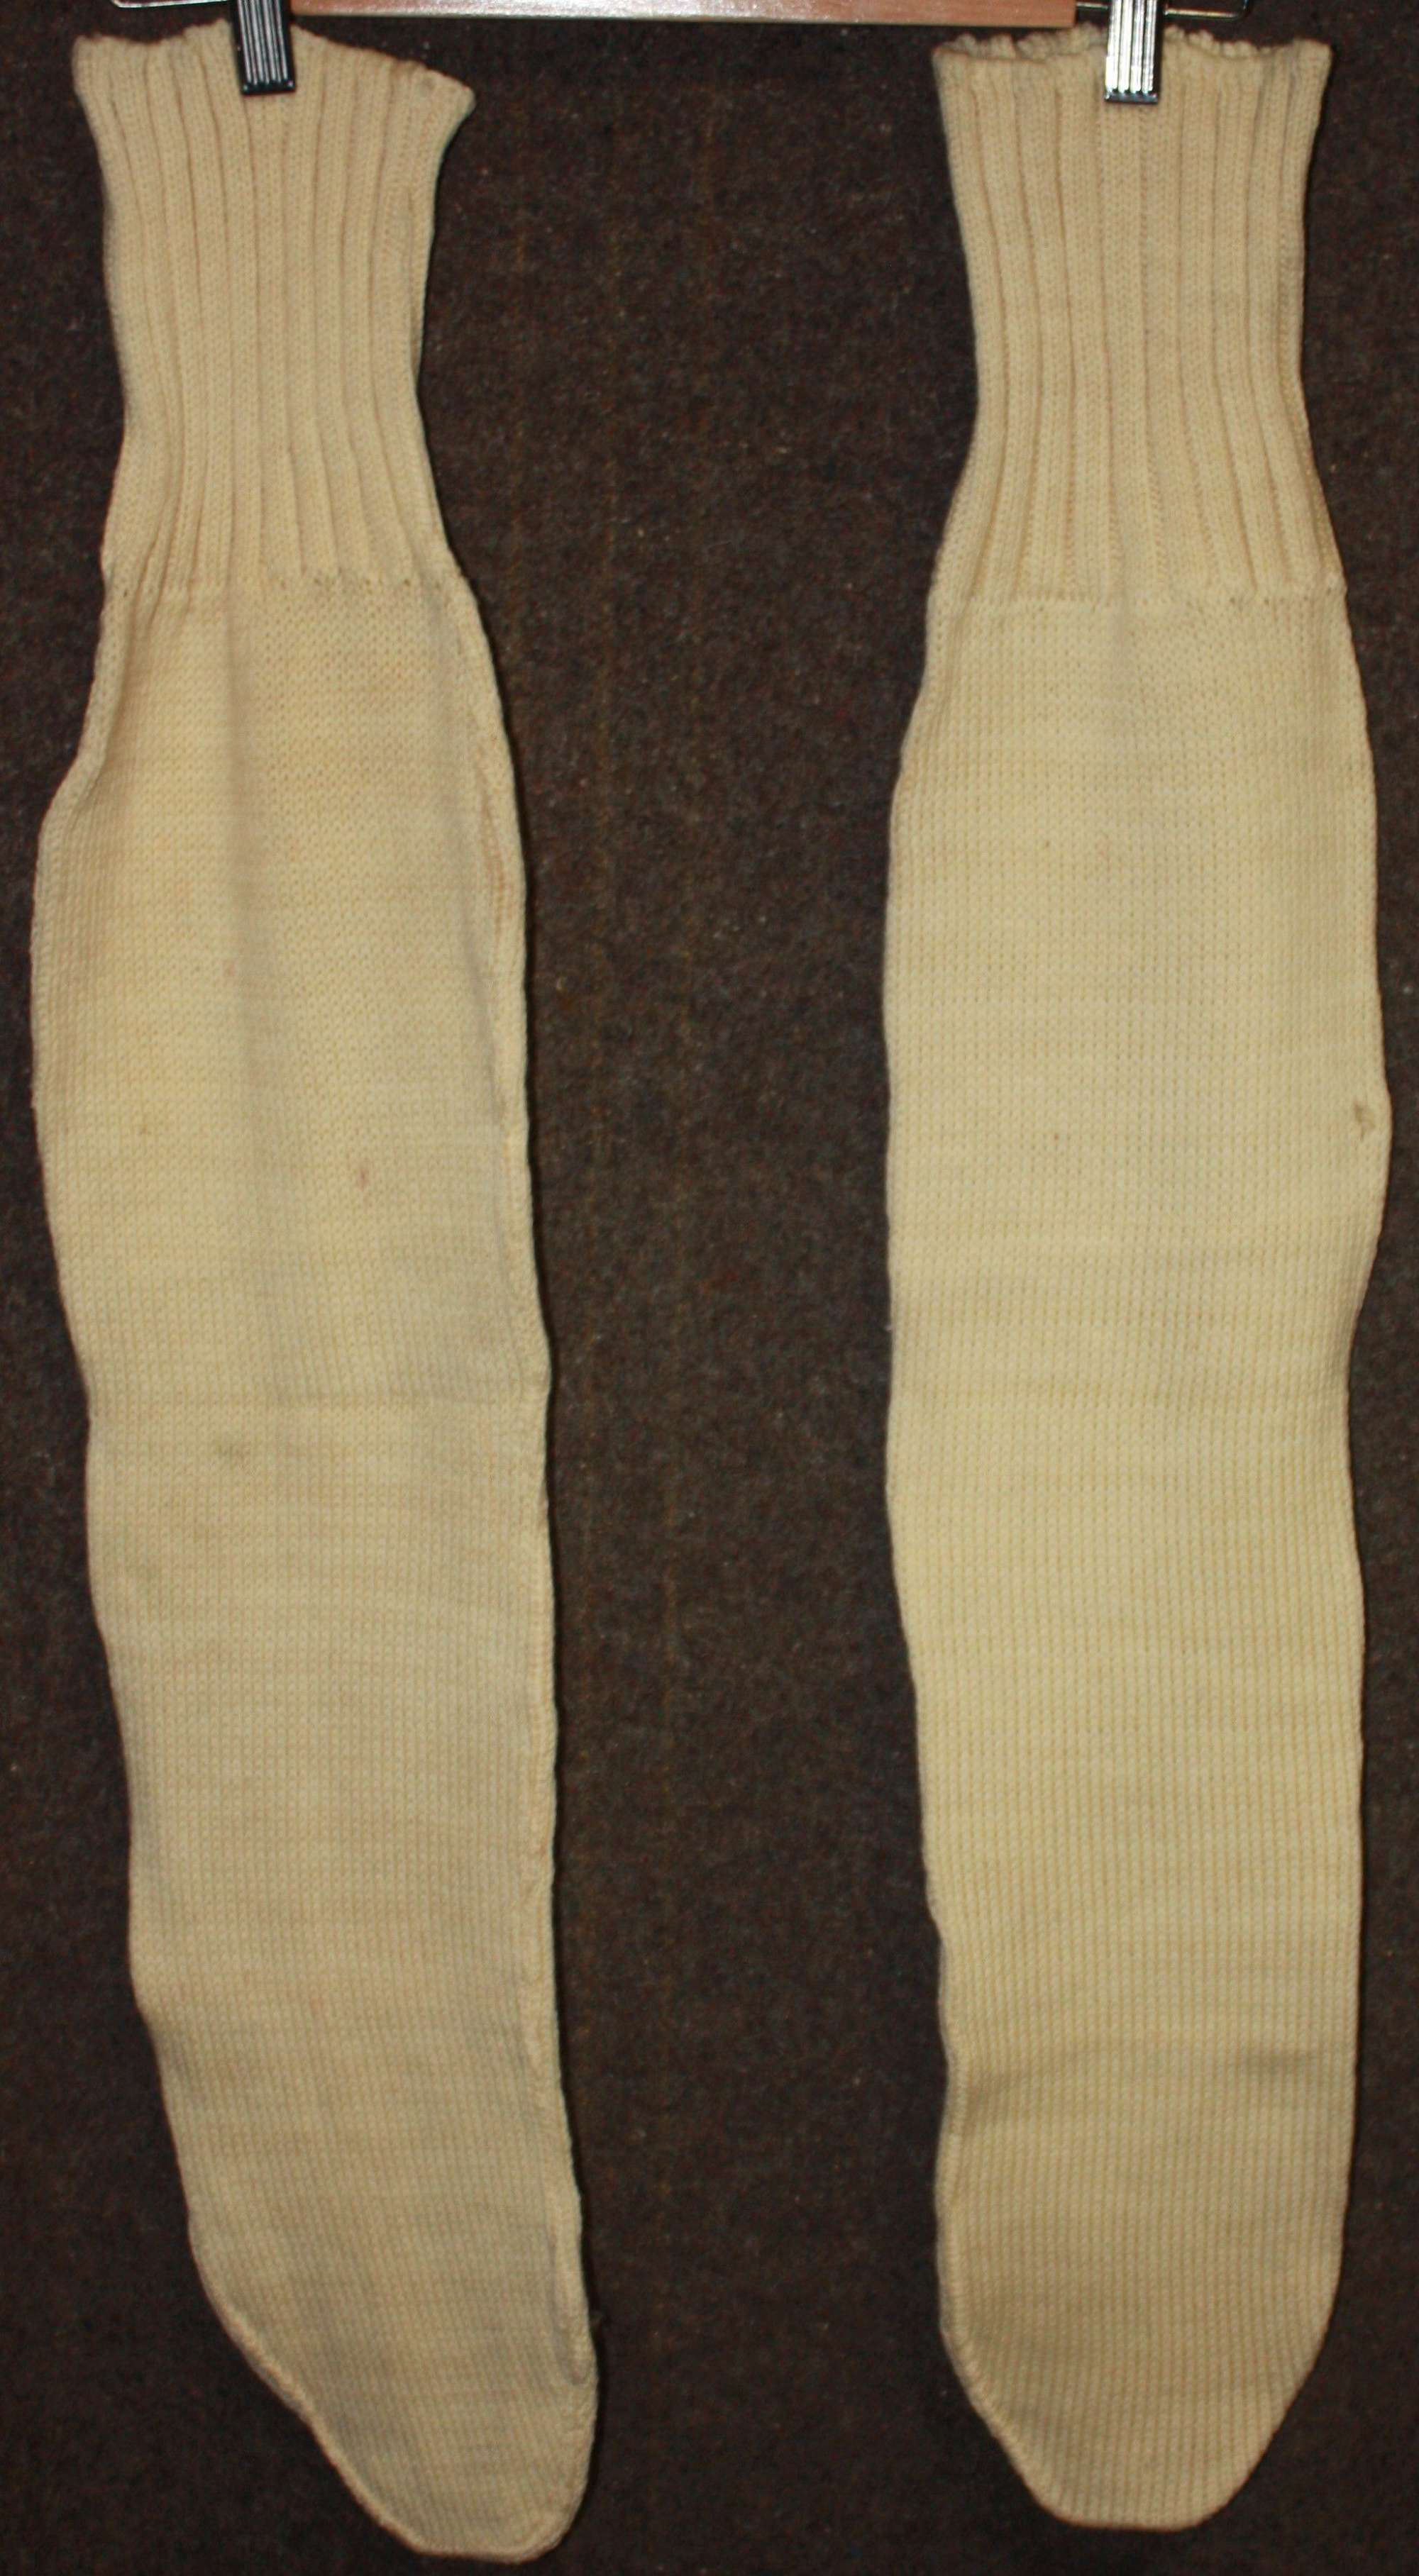 A RARE PAIR OF THE BRITISH FORCES WHITE WOOL BOOT SOCKS 1940 DATED